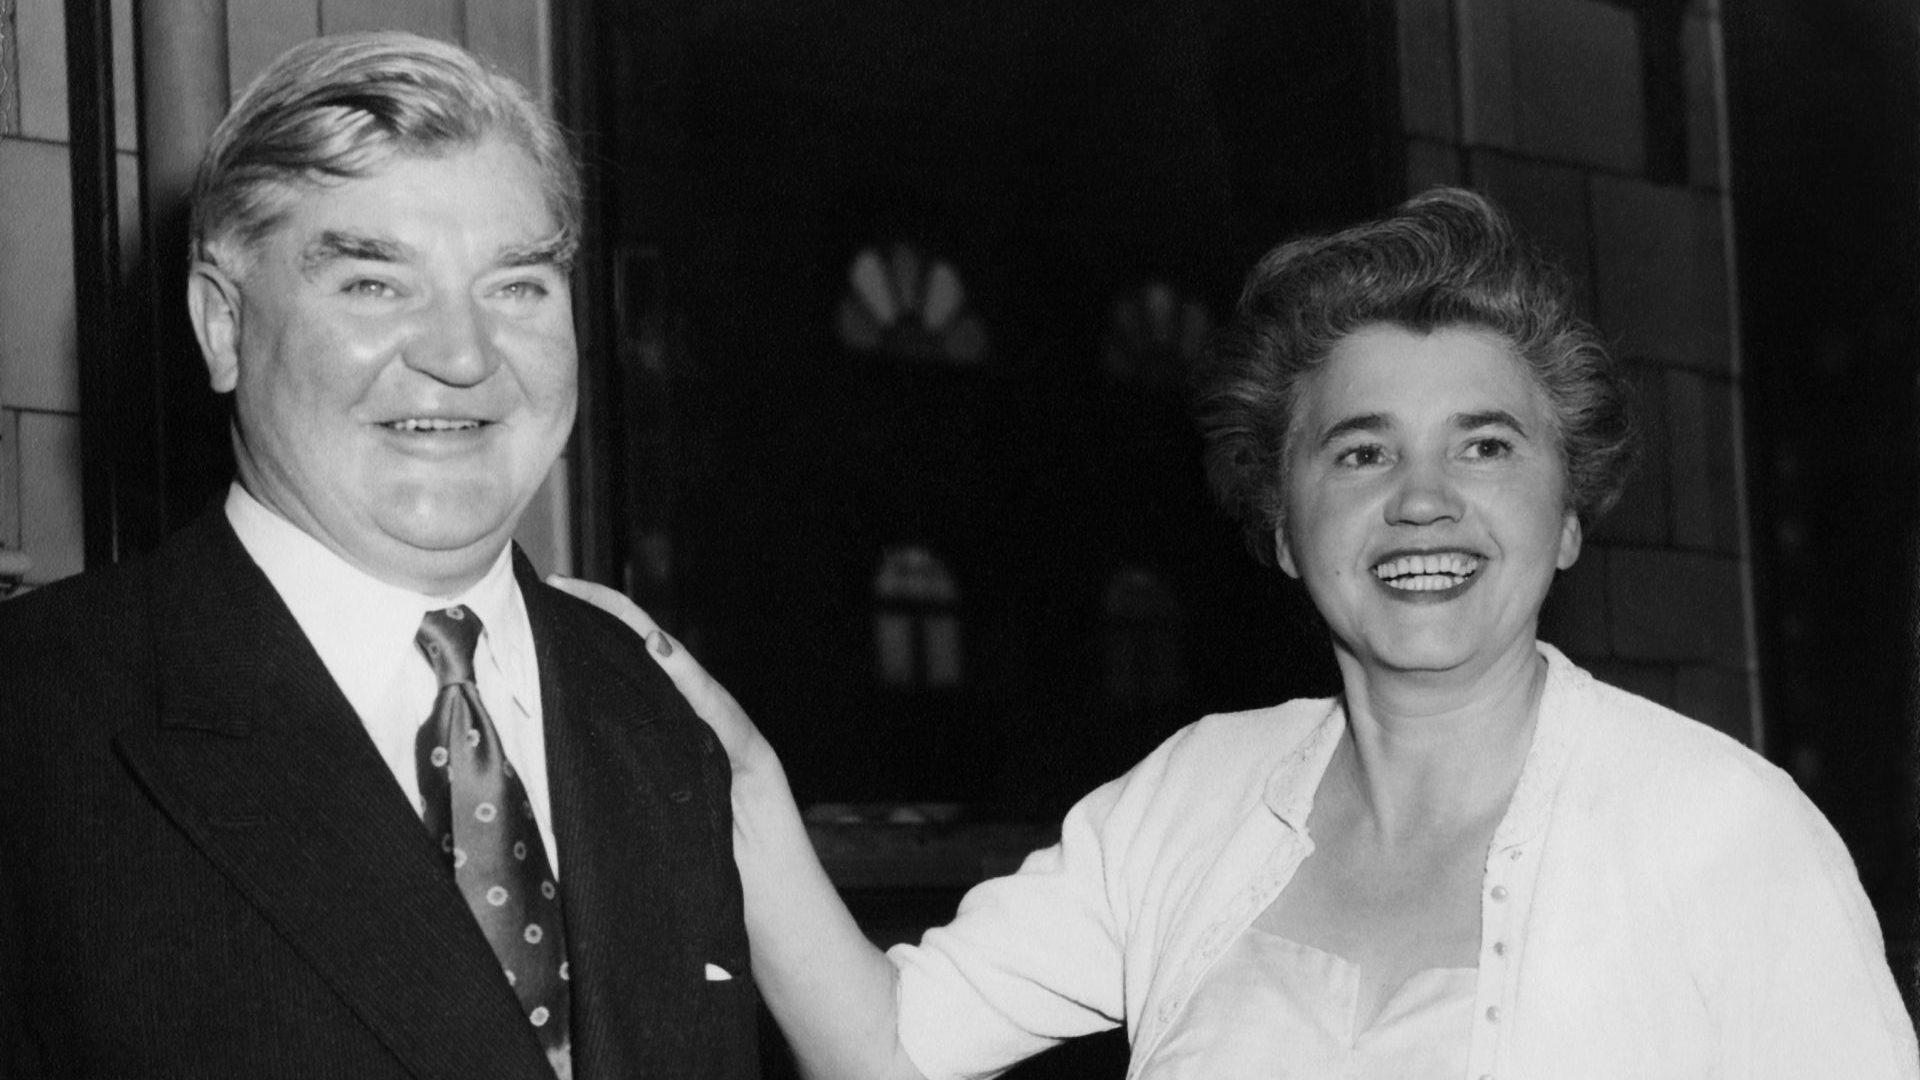 Nye Bevan and Jennie Lee in 1956. Photo: Central Press/Hulton Archive/Getty